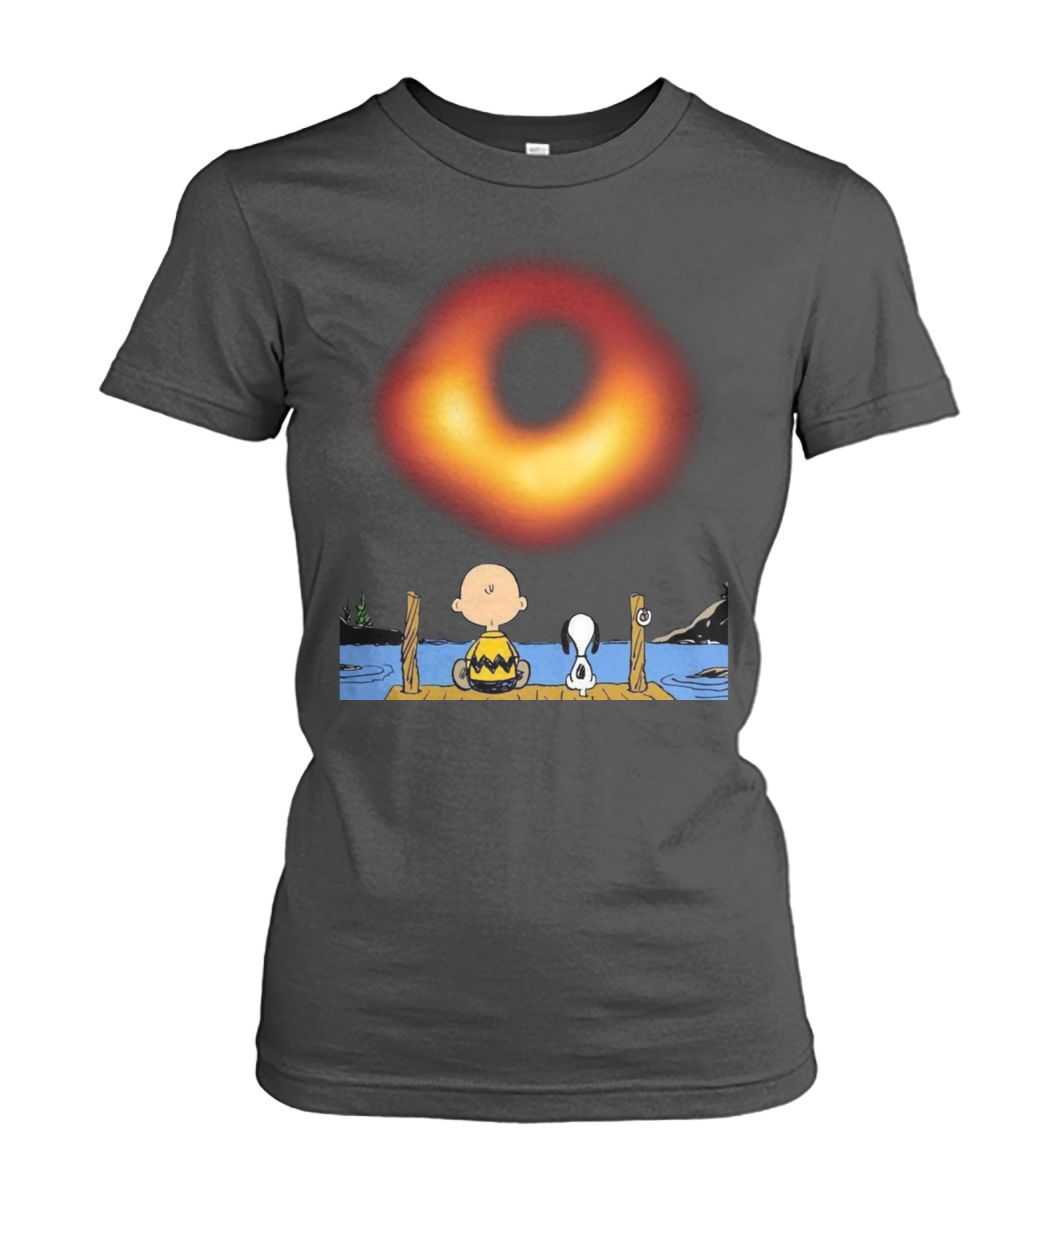 Snoopy and charlie brown black hole photo 2019 women's crew tee